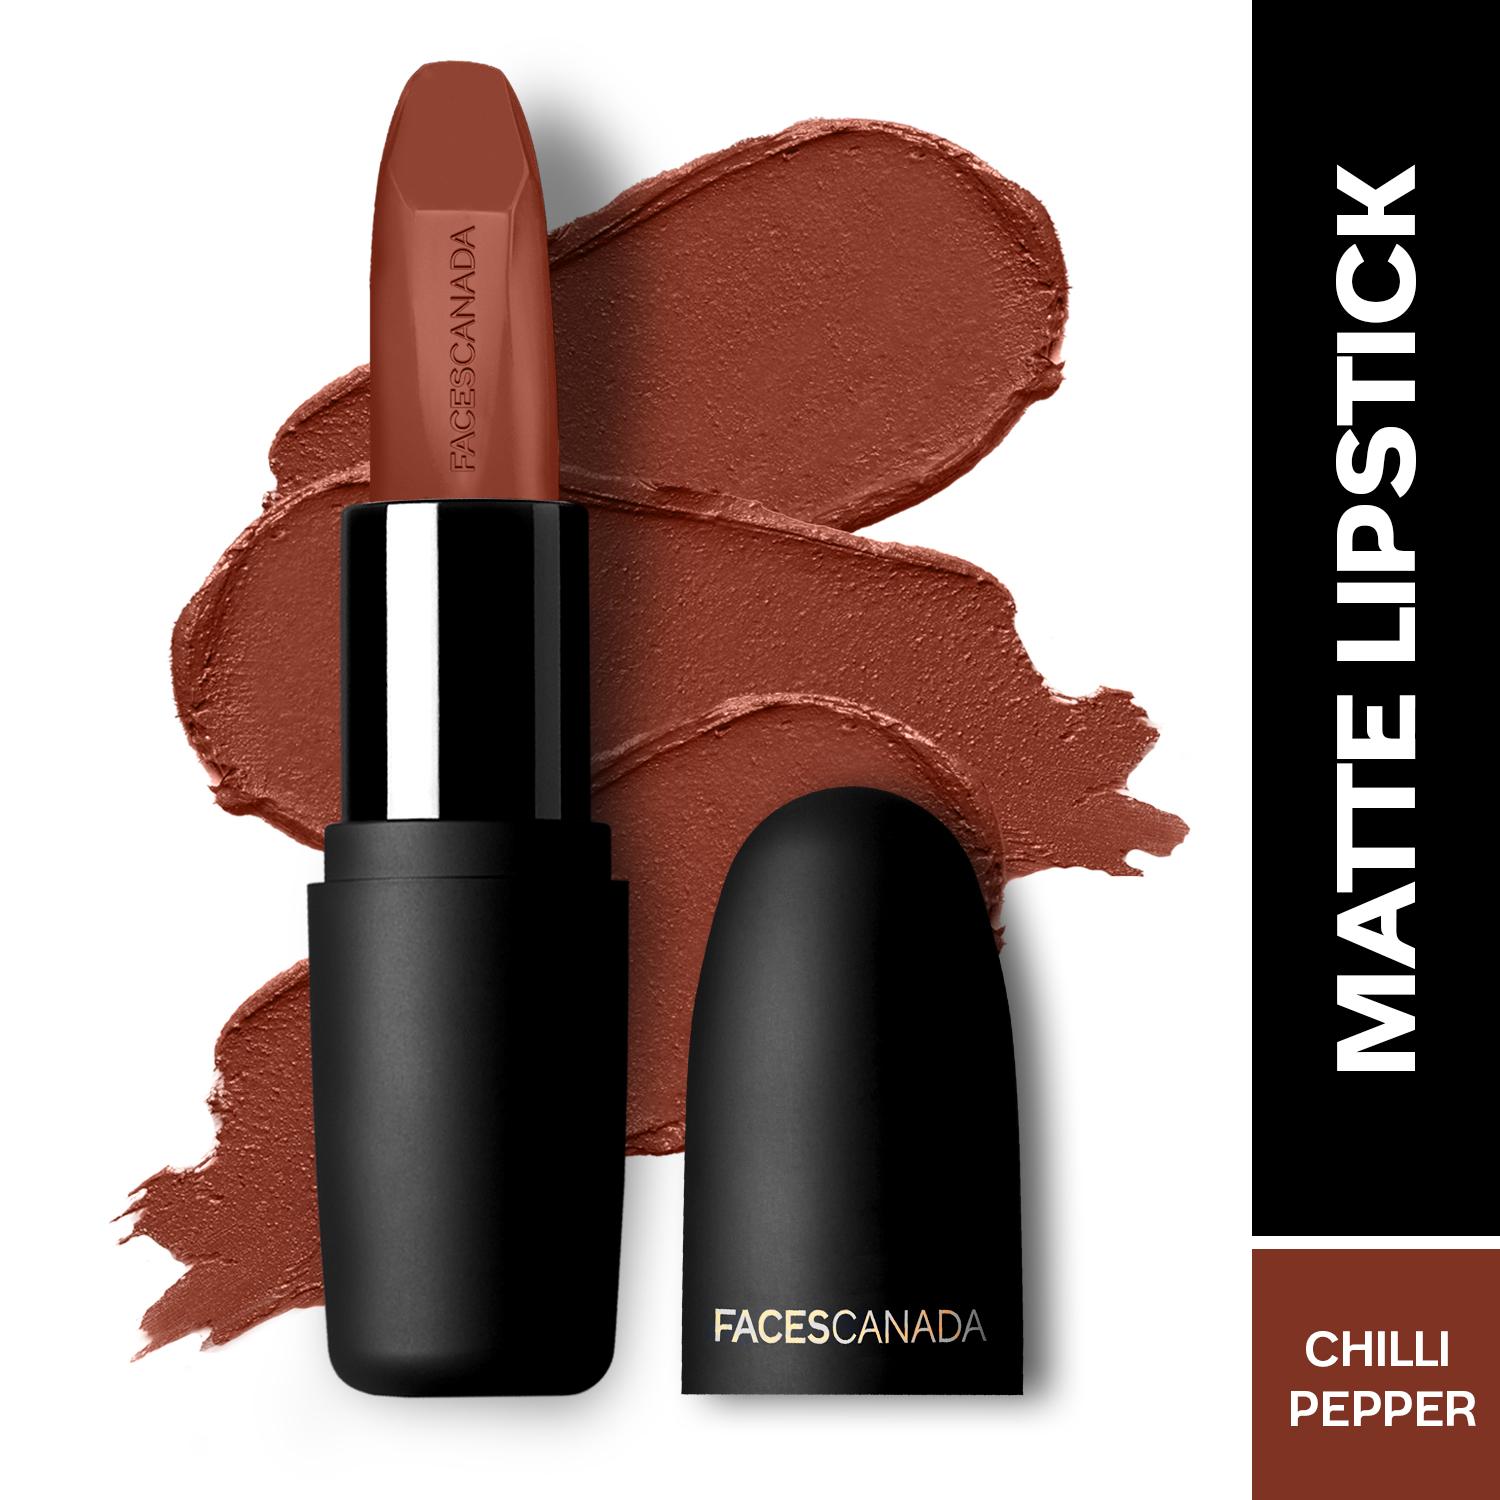 Faces Canada Weightless Matte Lipstick, Pigmented and Hydrated Lips - Chilli Pepper 11 (4.5 g)